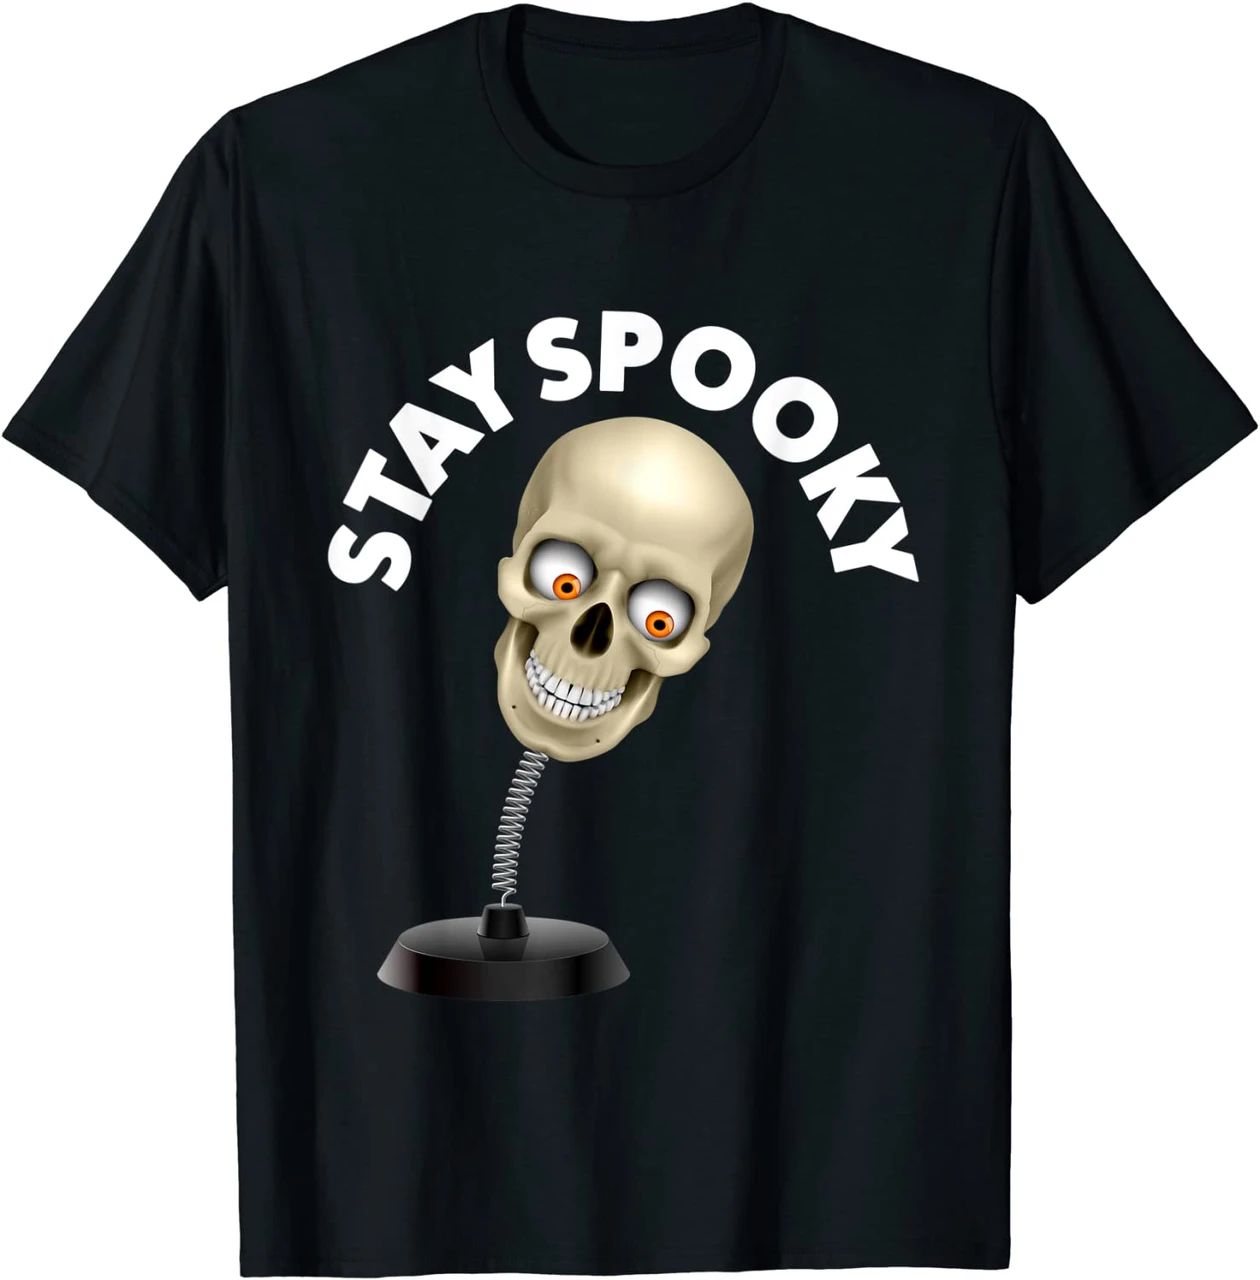 Stay Spooky Halloween Graphic Design Shirt